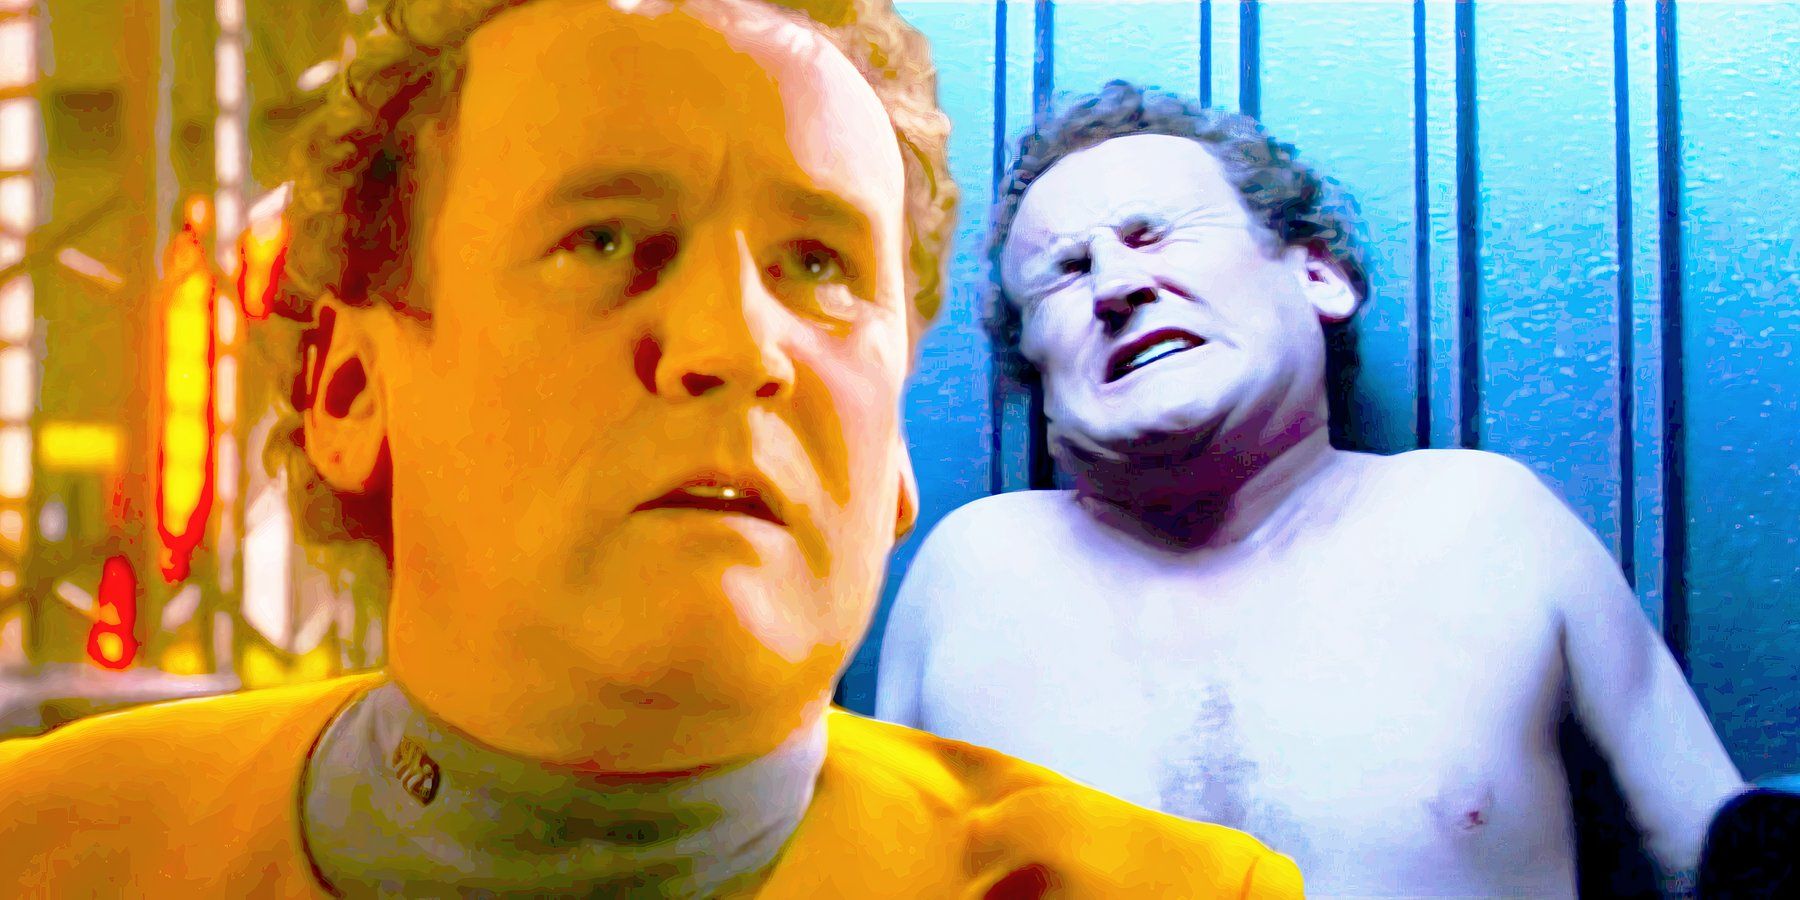 Composite image of O'Brien looking tearful and O'Brien getting beaten up with his shirt off in Star Trek: DS9